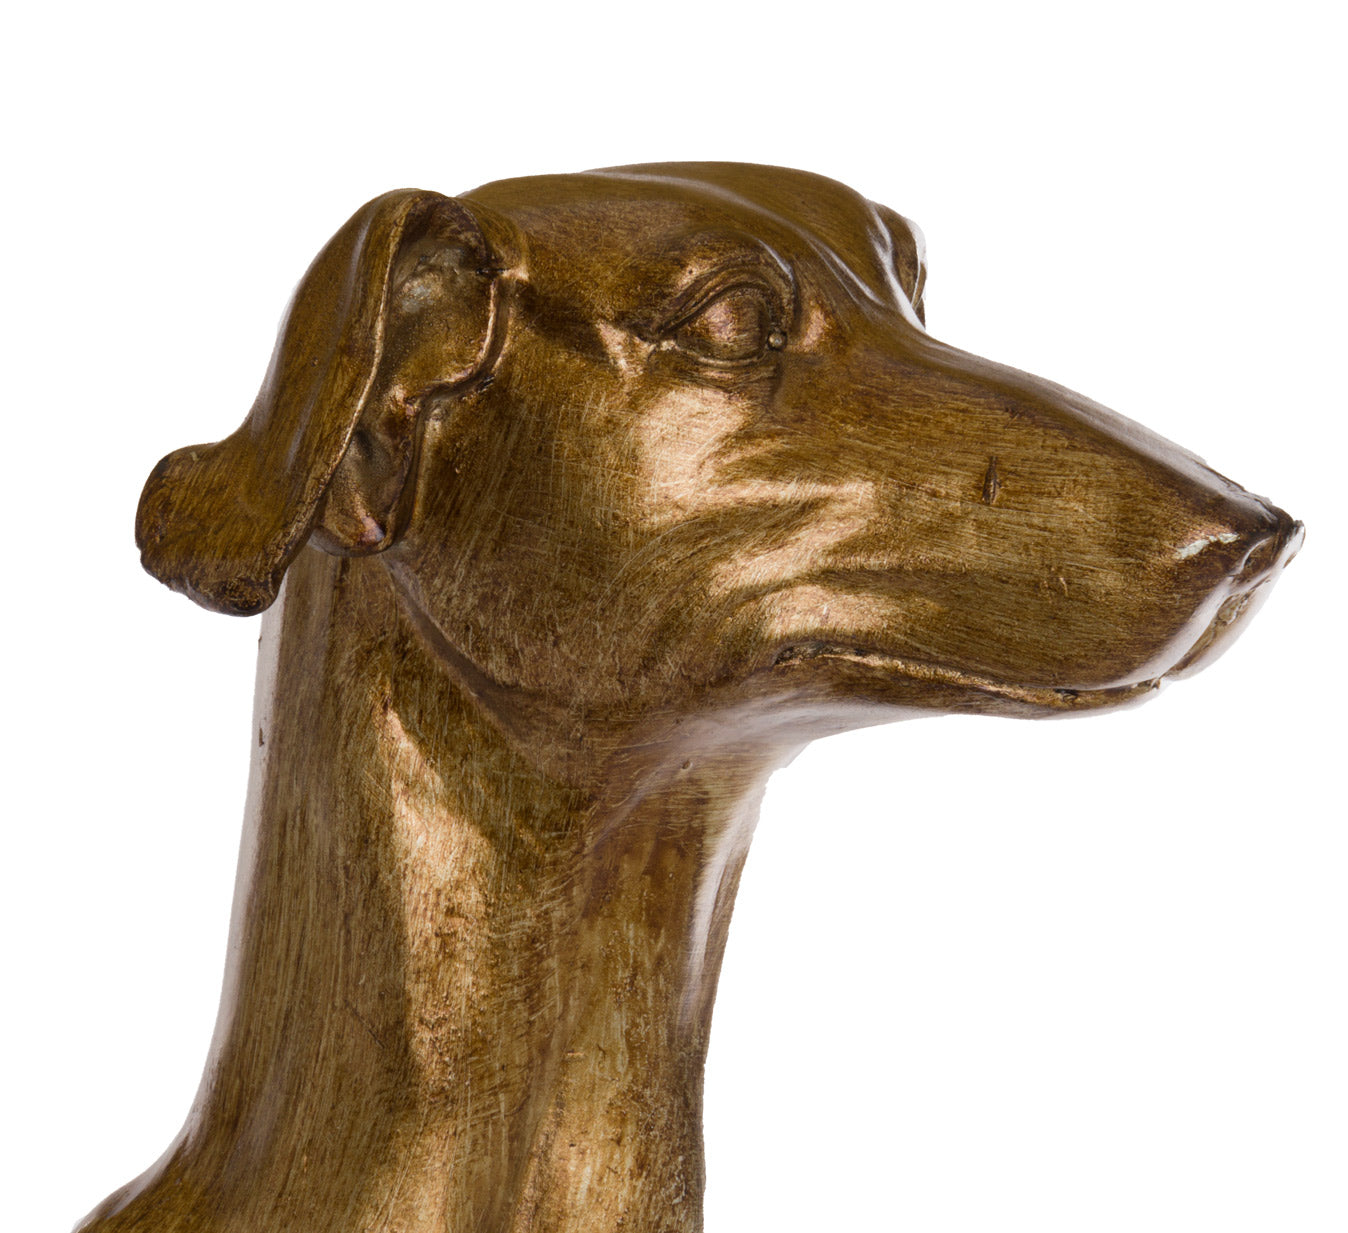 William The Whippet Gold Lamp With Charcoal Shade